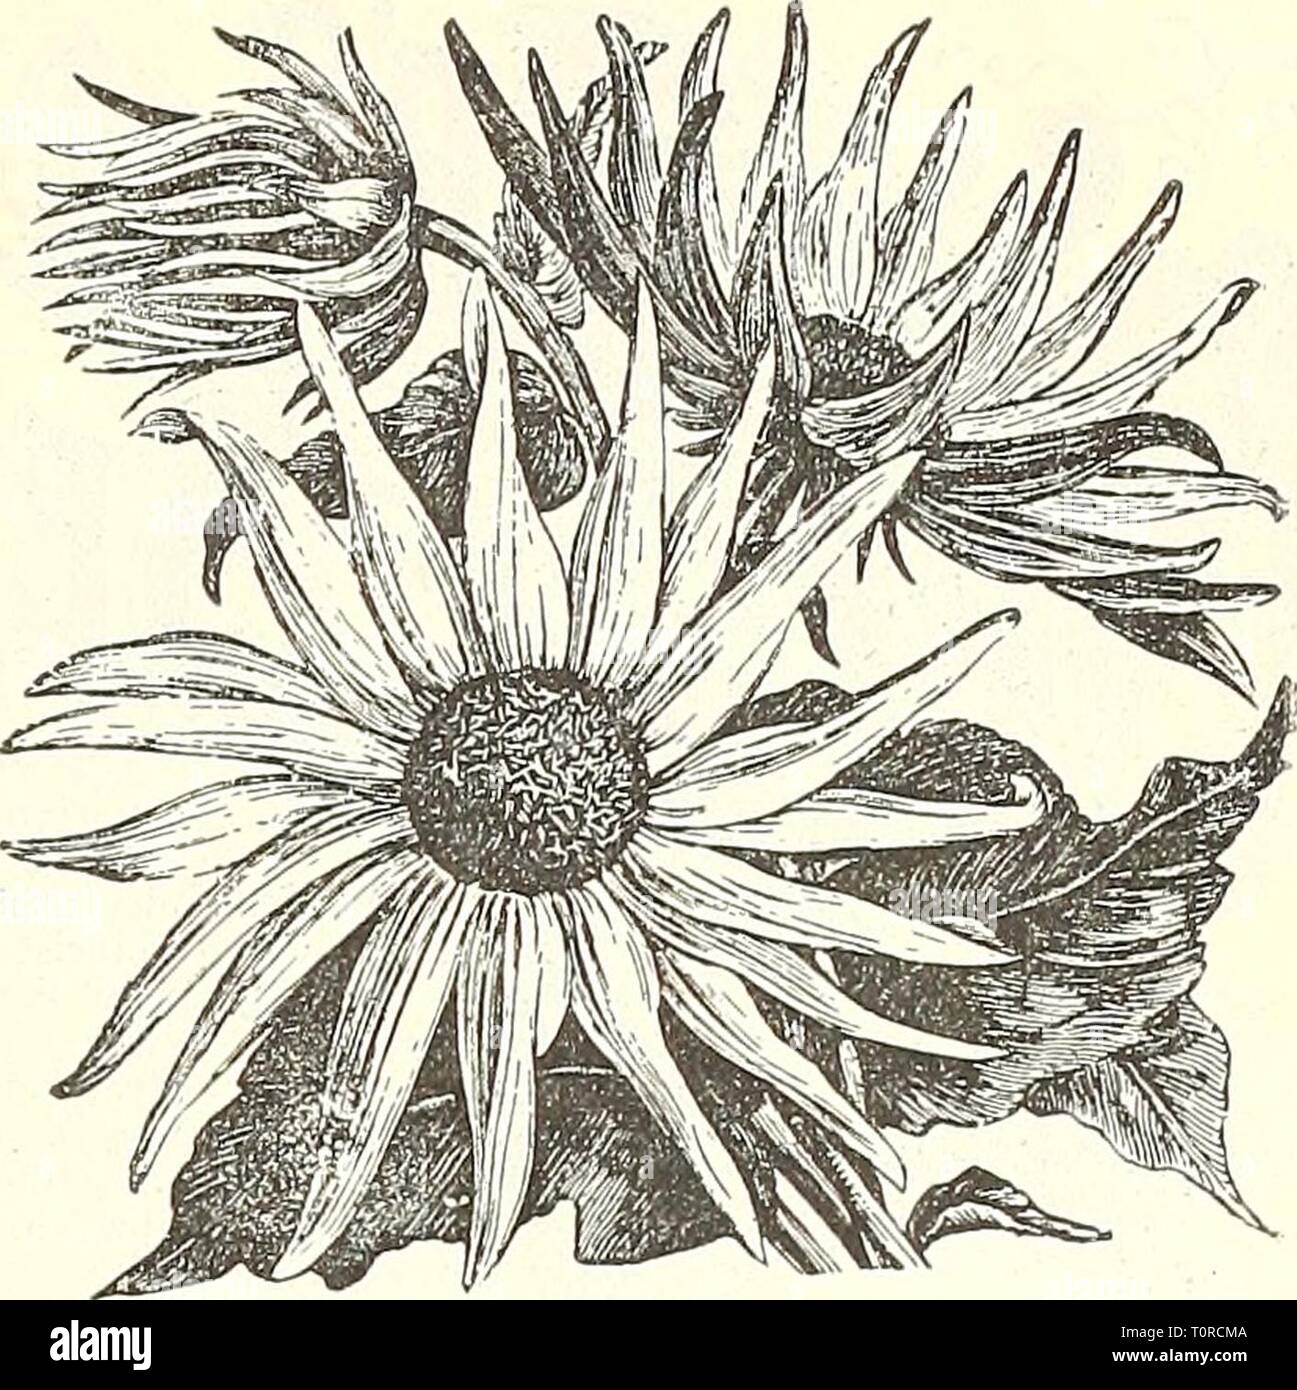 Dreer's garden book  1904 Dreer's garden book : 1904  dreersgardenbook1904henr Year: 1904  Sunflower, Okion. black centres and all beauti ful; for cutting they are indis- , pensable 10 2707 — Perkeo. A charmin dwarf variety of the Miniature Sunflower. The plants form compact bushes about 12 in. high by 14 in. through. There are mrny positions, such as the front of borders or beds of plantsof medium height,where this can be used to good ad- vantage, flowering as it does from the end of June unti cut d')wn by hard frost 2705 Golden Bouquet. A hardy perennial variety, coming into flower in Septem Stock Photo